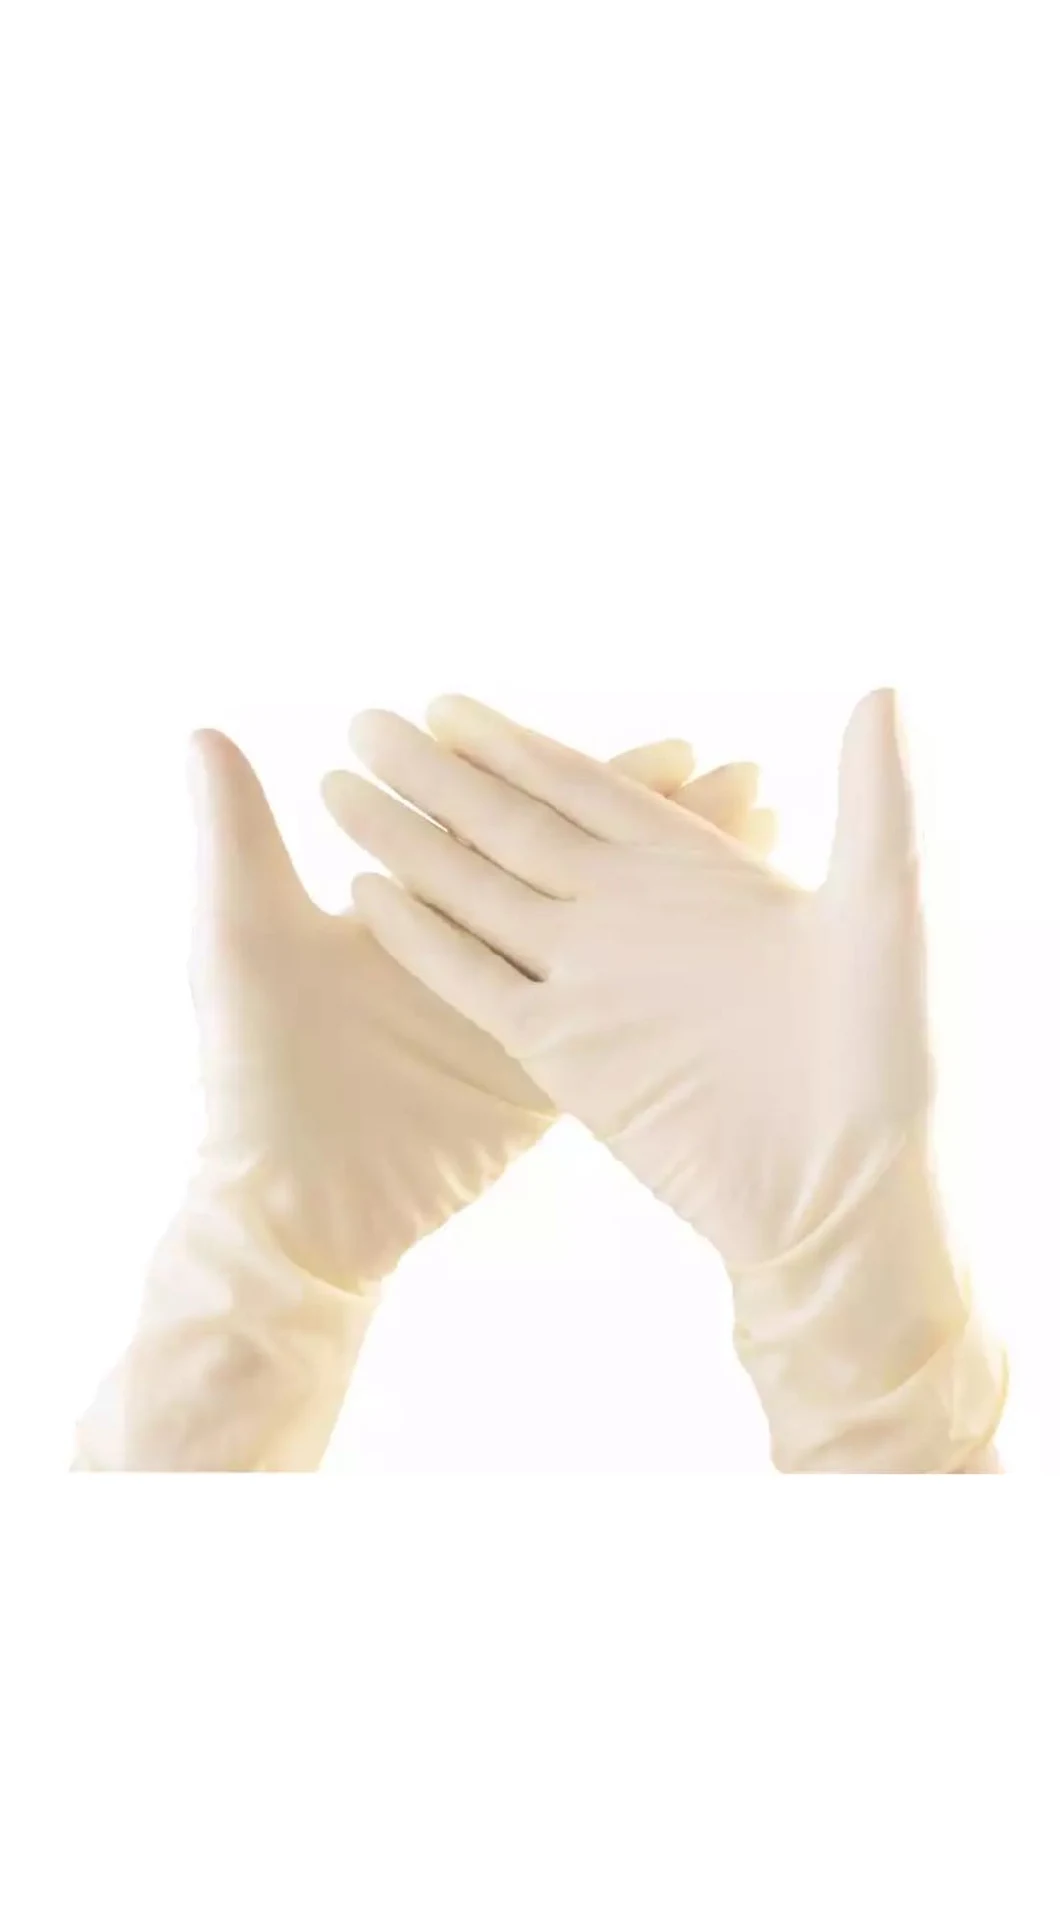 Manufacturer Specializing Production Disposable Nitrile Gloves, Latex Gloves, PVC Gloves, Waterproof Medical Glove